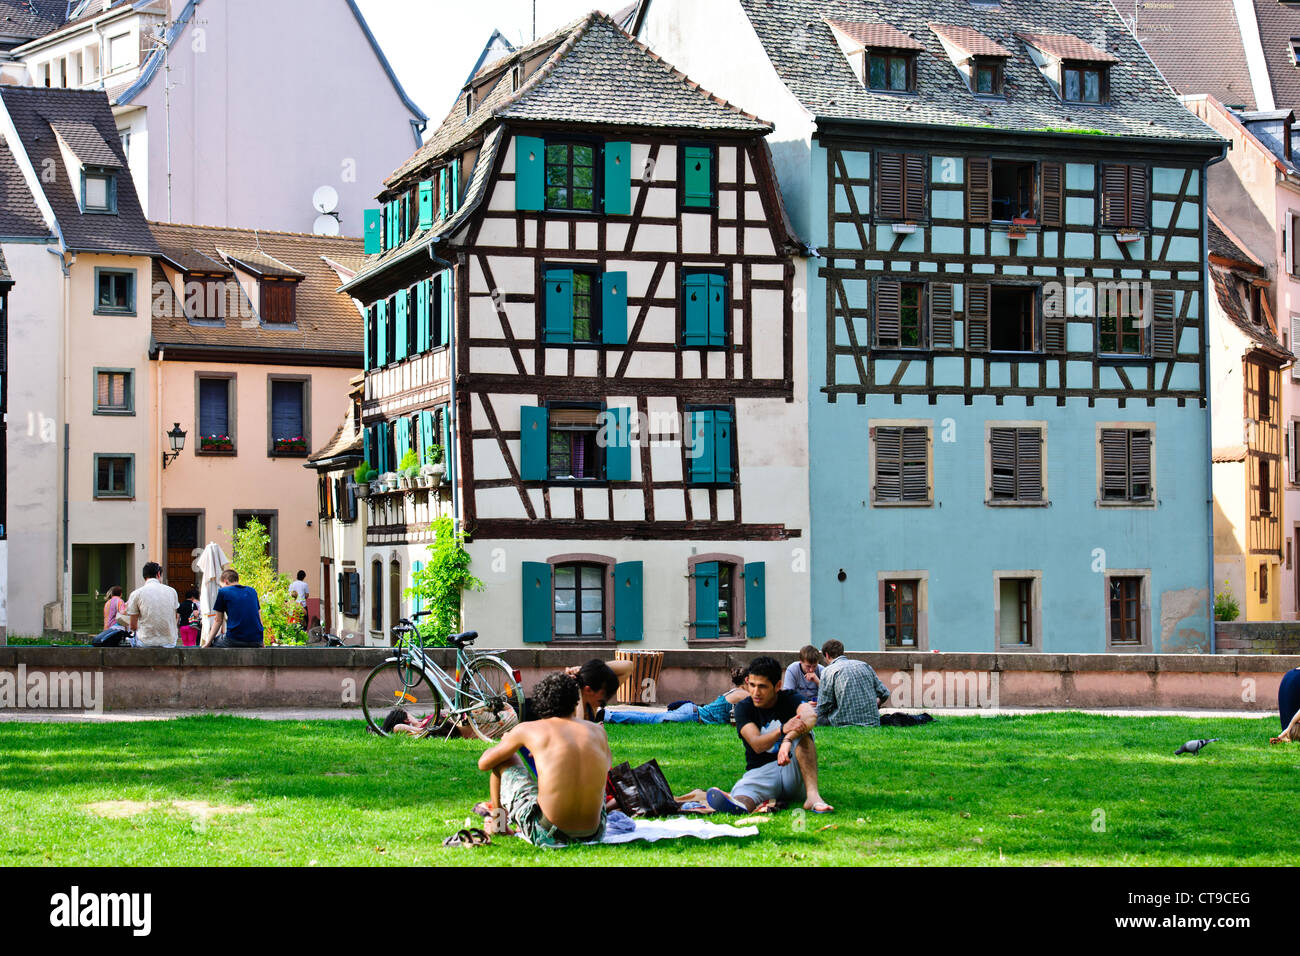 Many timbered and half-timbered houses in the area,some dating from mediaeval times,L'ILL River,Petit France,Strasbourg,France Stock Photo